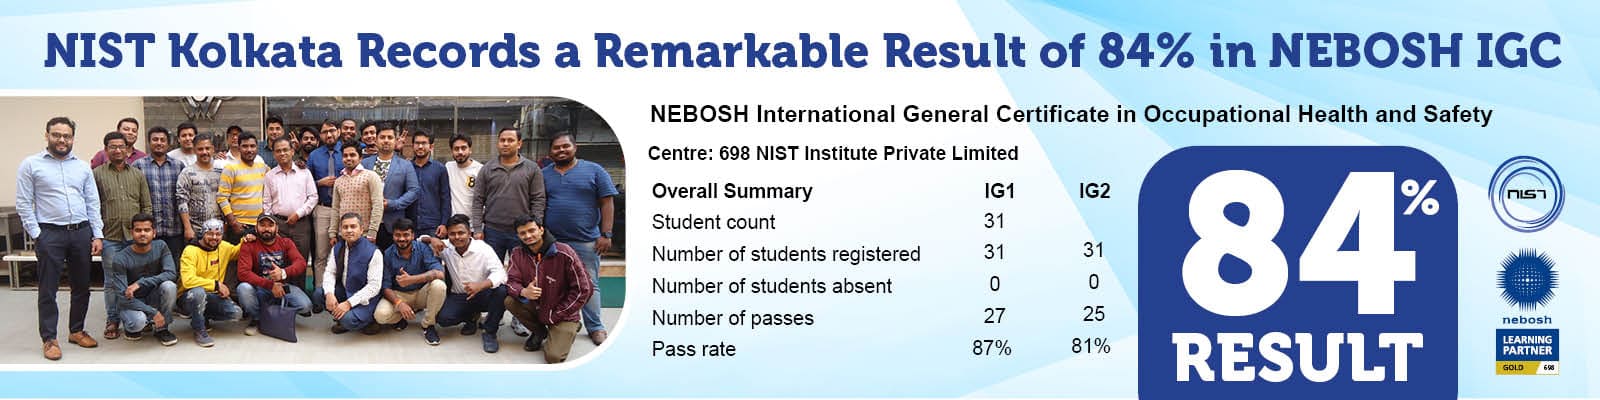 nist-kolkata-records-a-remarkable-result-of-84-in-nebosh-igc